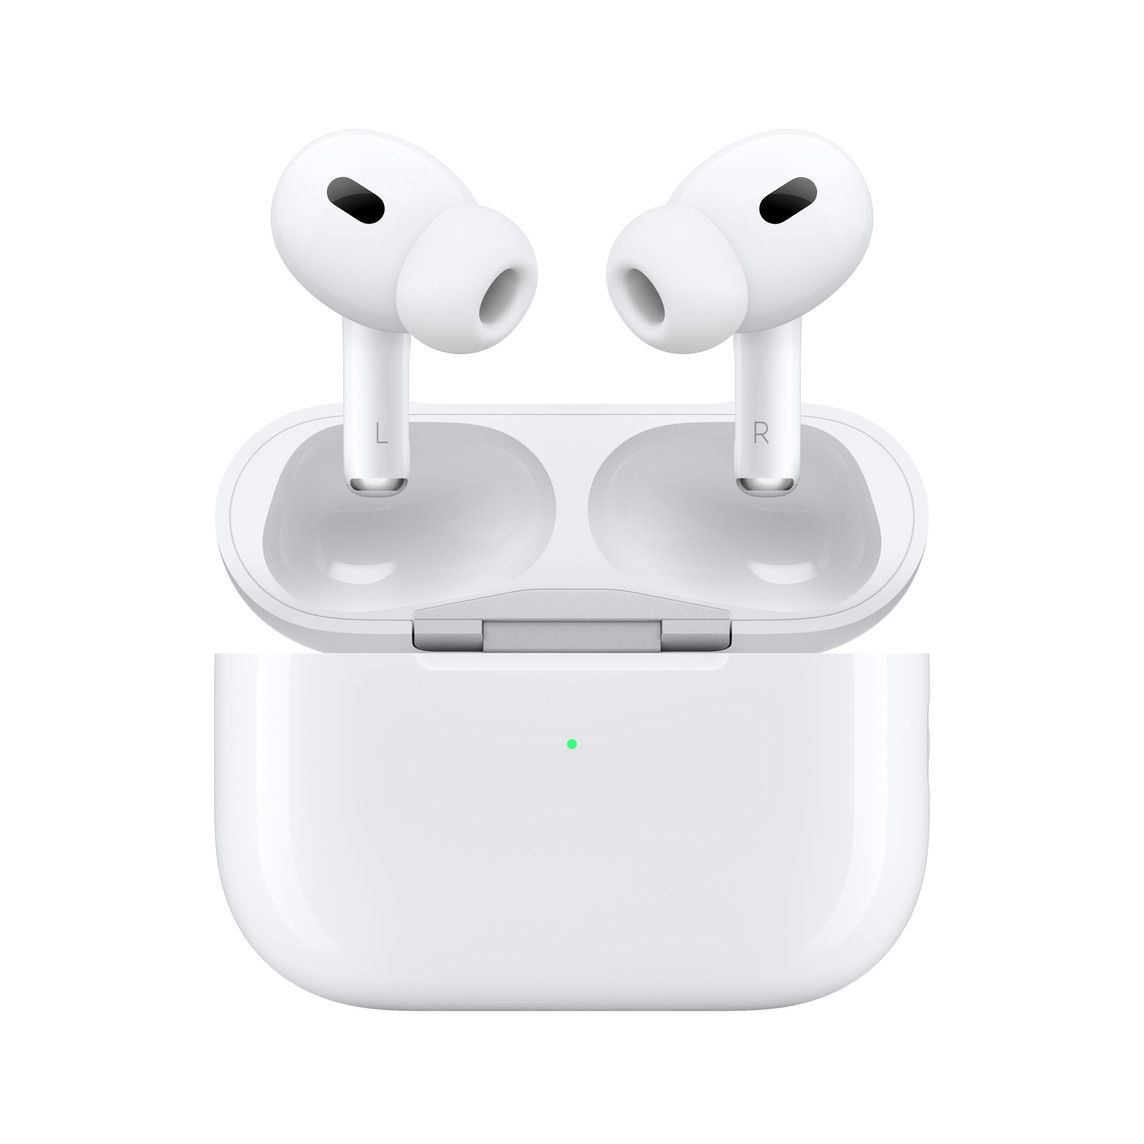 The AirPods Pro 2 support Active Noise Cancellation, Dolby Atmos content, and wireless charging. They pack plenty of offerings, despite their compact build.